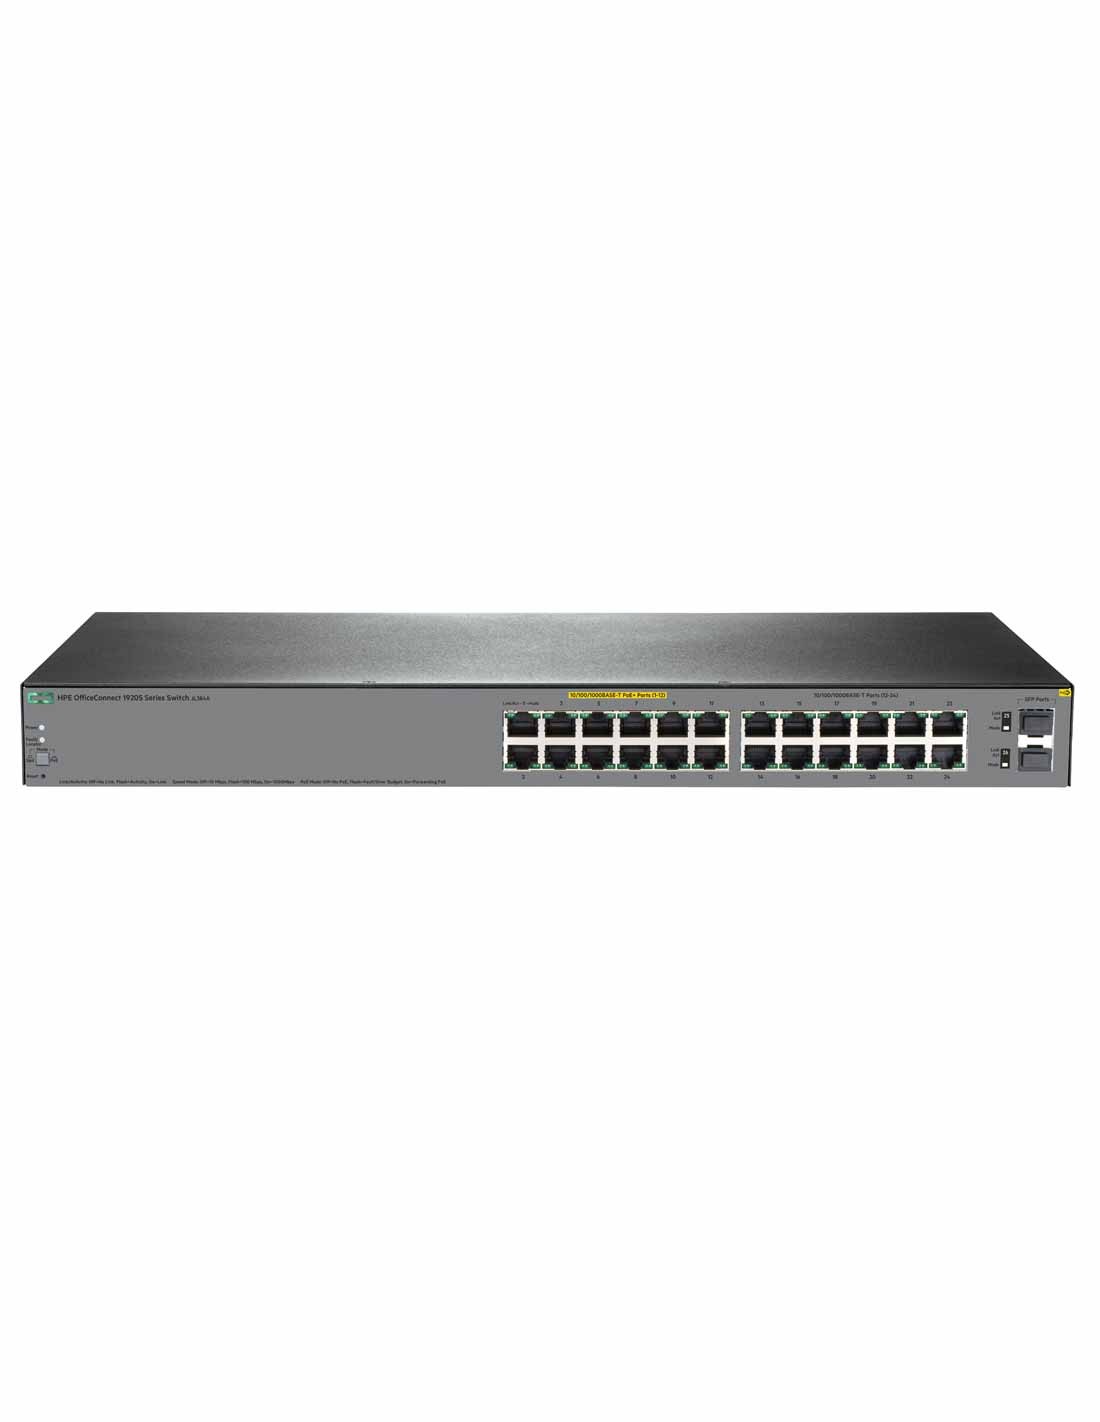 HPE 1920S 24-Port 2SFP PPoE+ 185W Switch at a cheap price and free delivery in Dubai